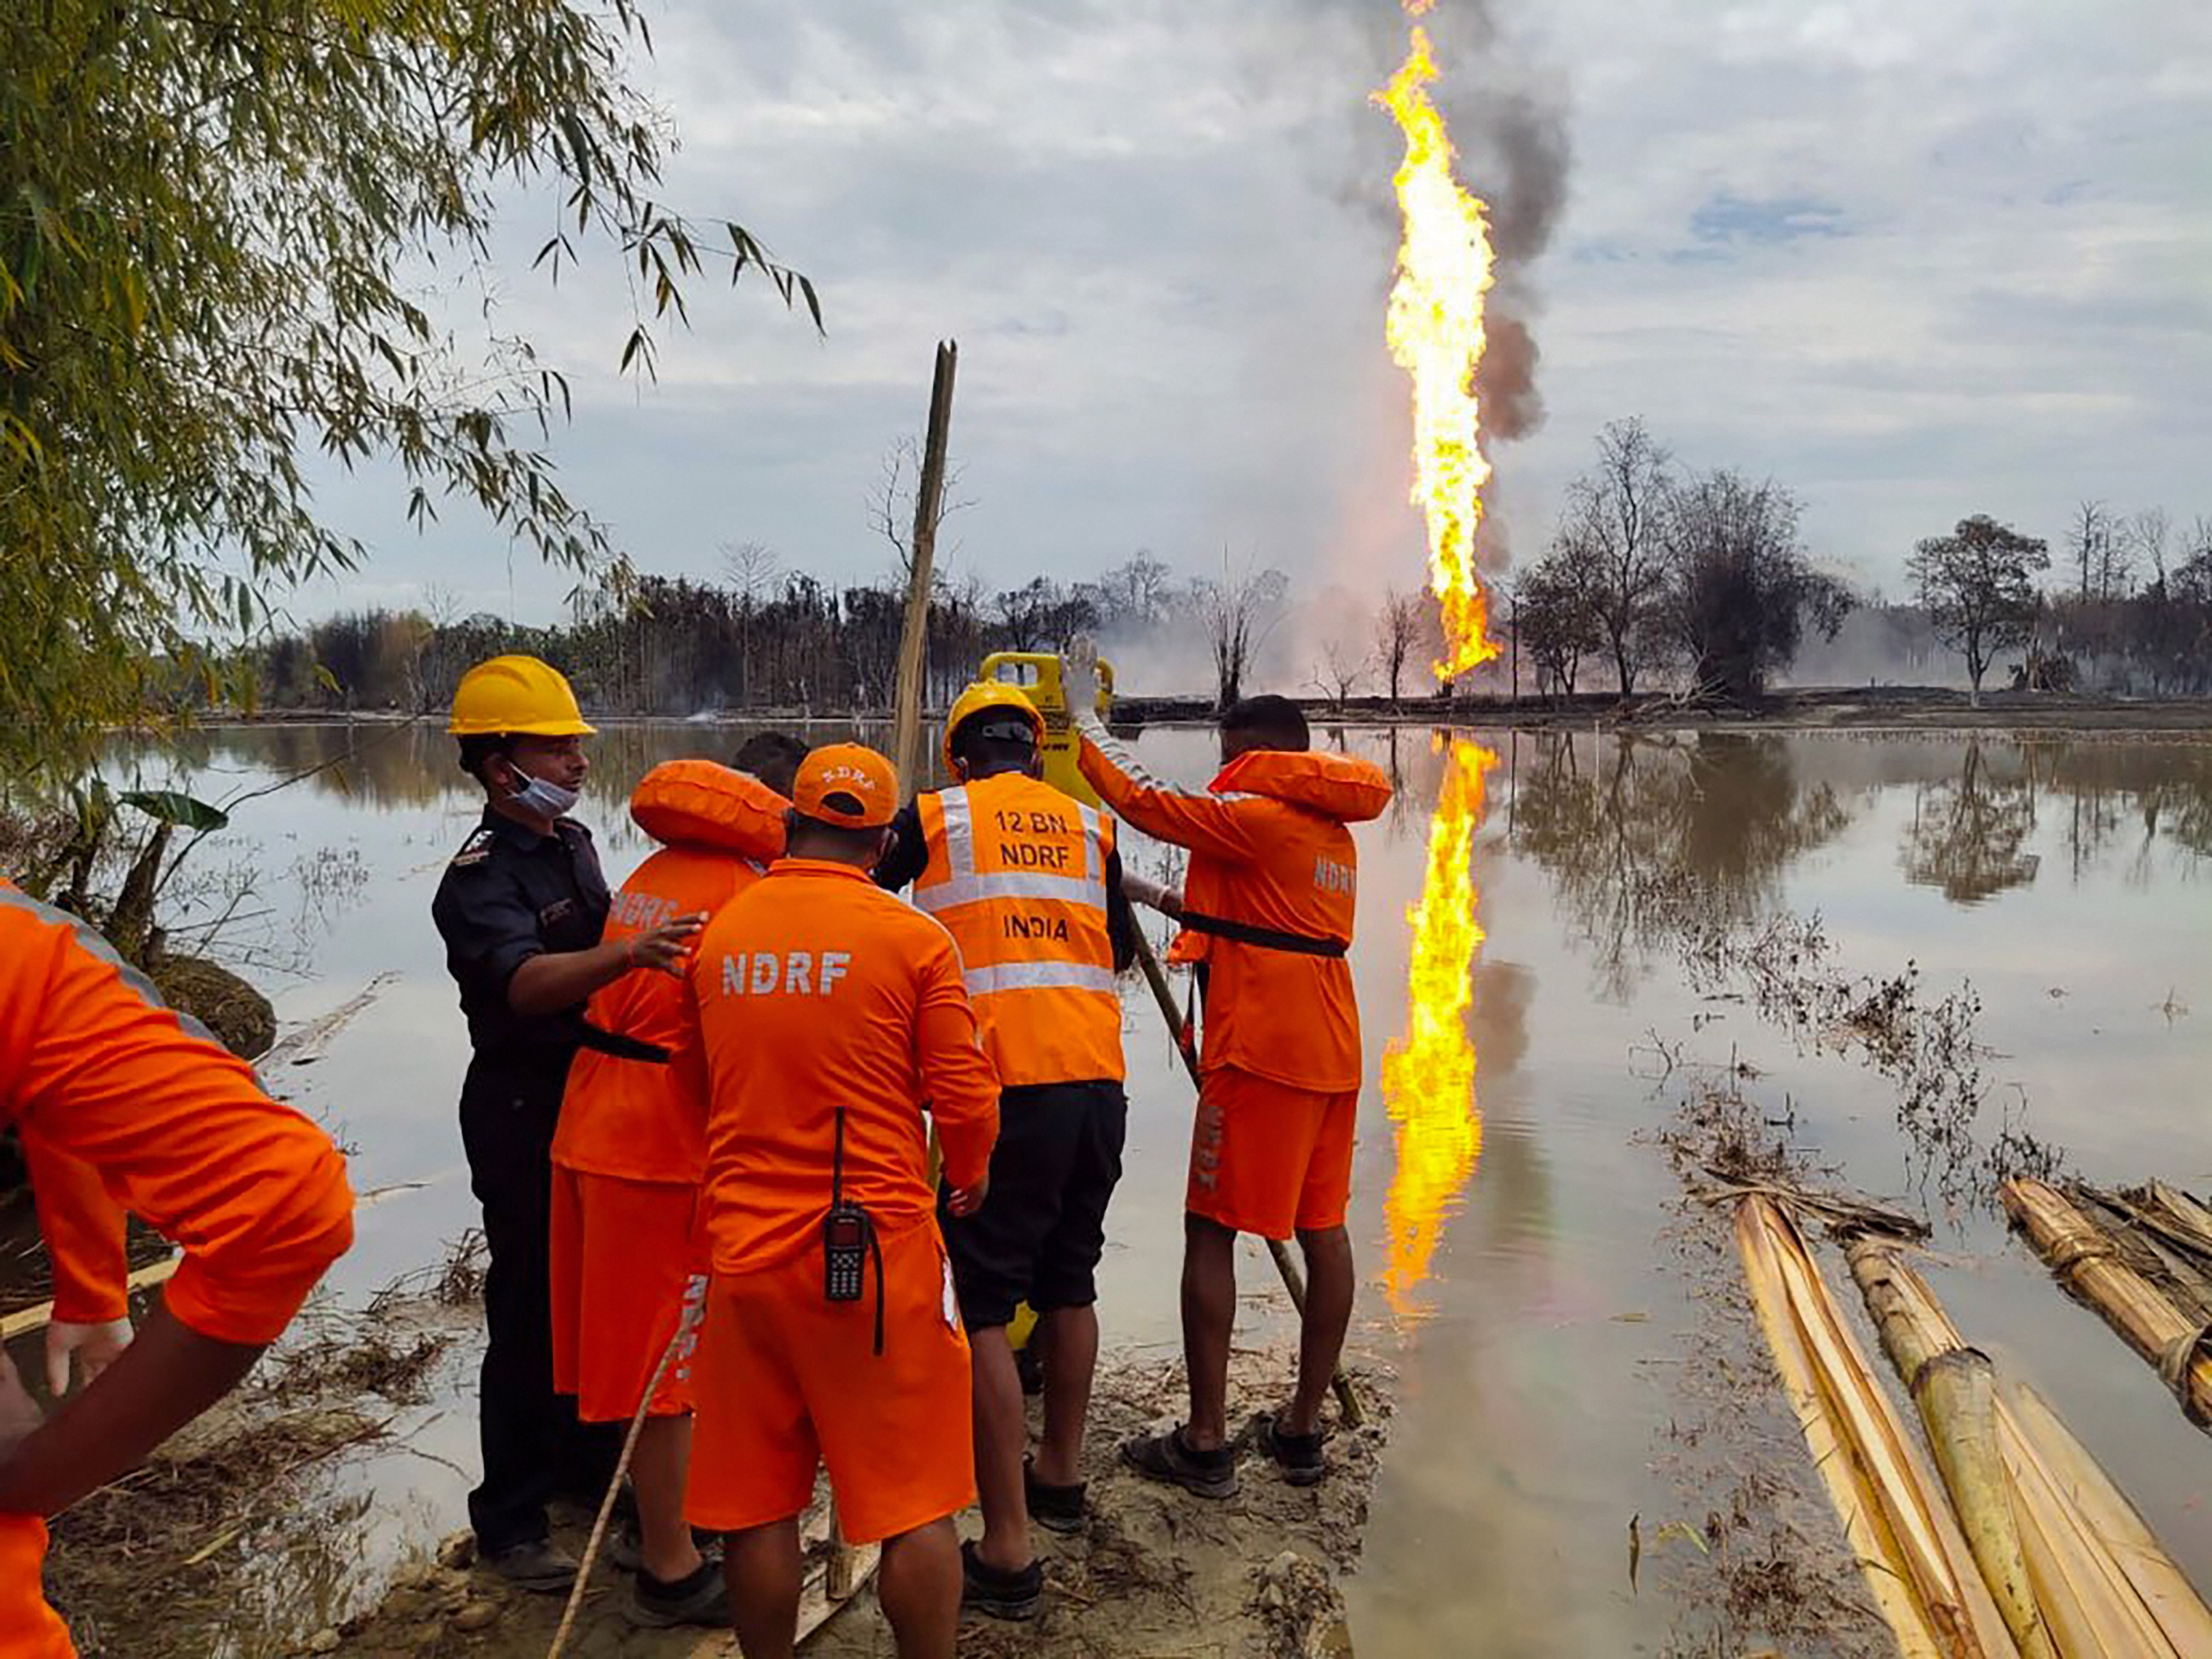 National Disaster Response Team (NDRF) personnel carry out search and rescue operations after two firemen of Oil India Limited went missing since an oil well at the company’s Baghjan oilfield exploded in Assam’s Tinsukia district.